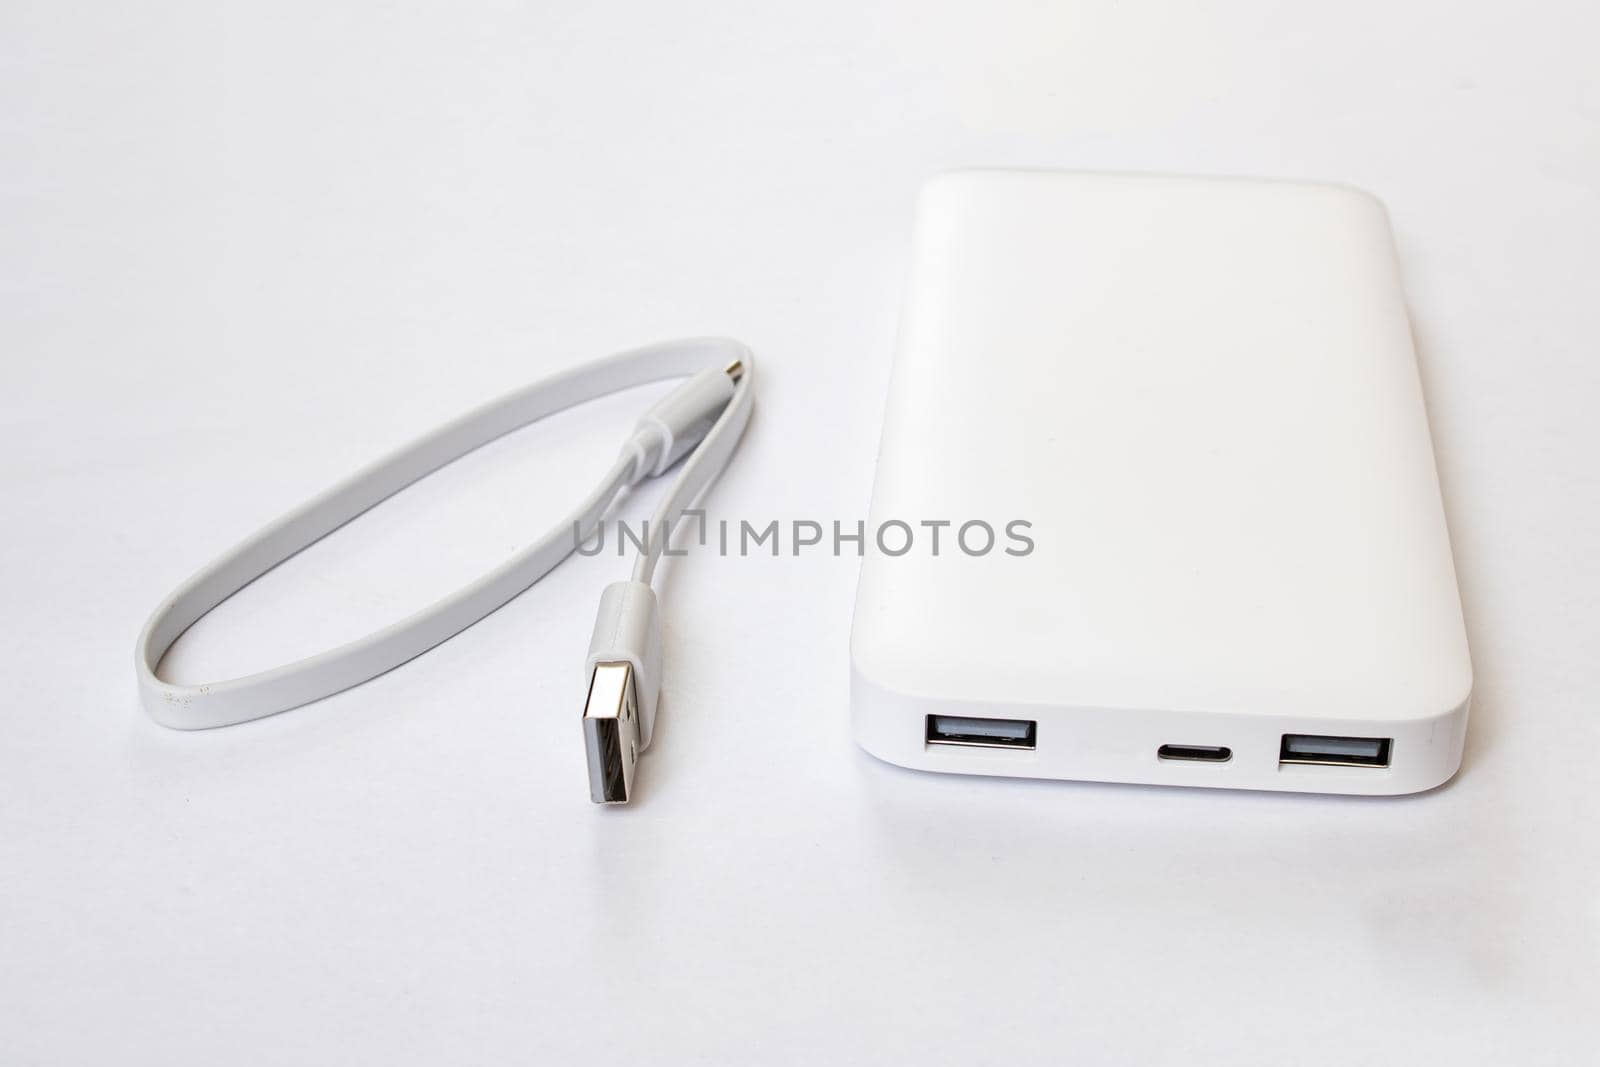 Power bank and cable on white background by Vera1703